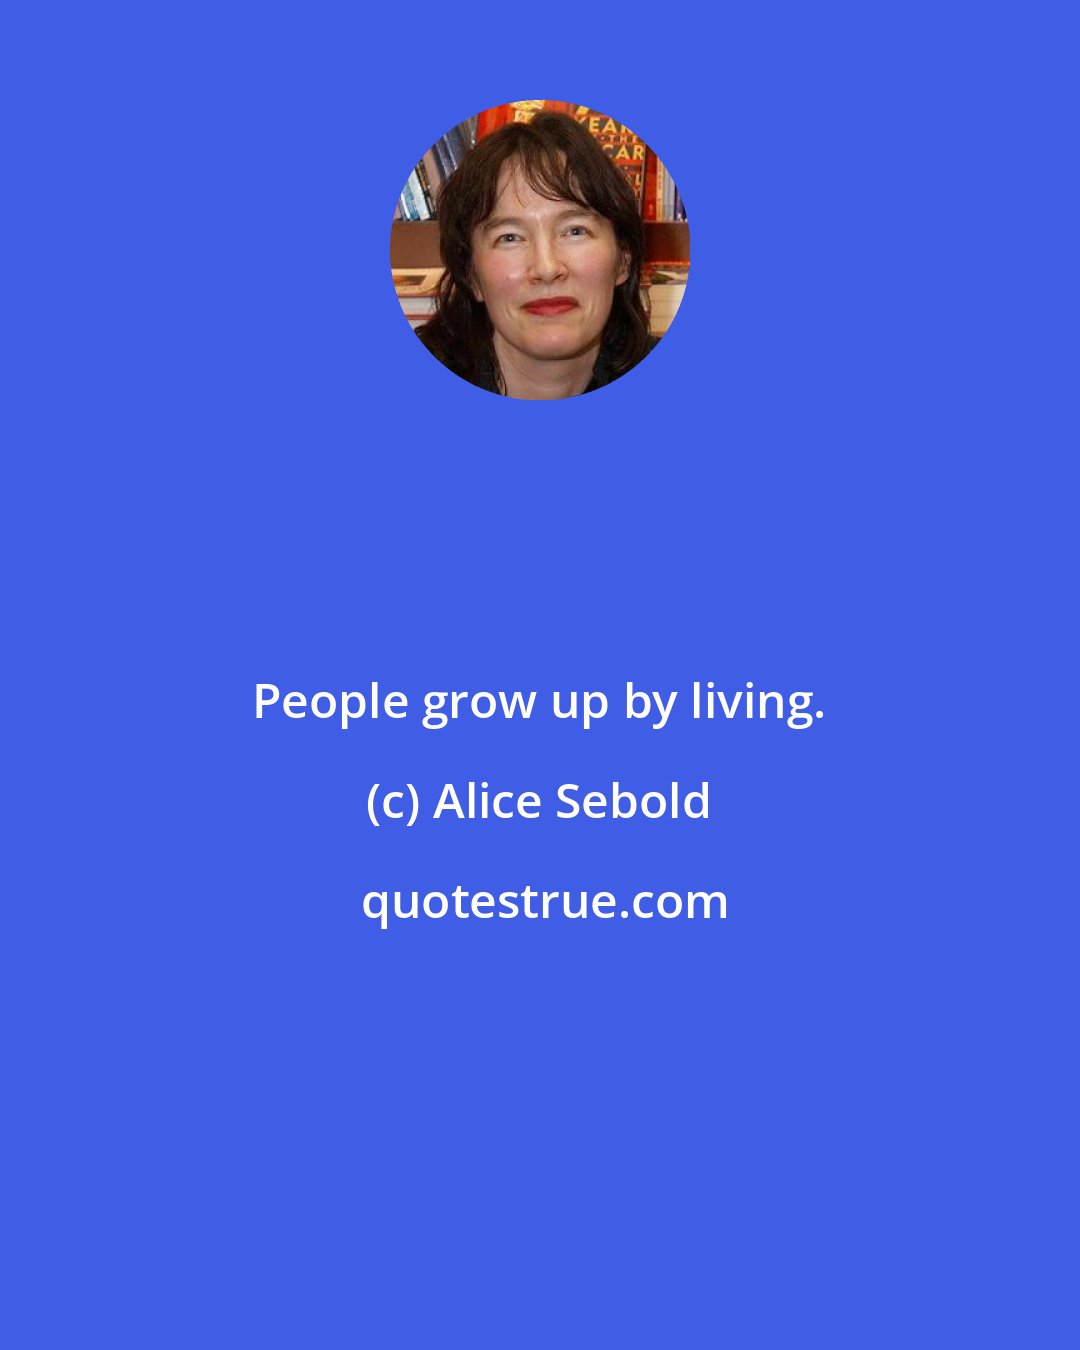 Alice Sebold: People grow up by living.